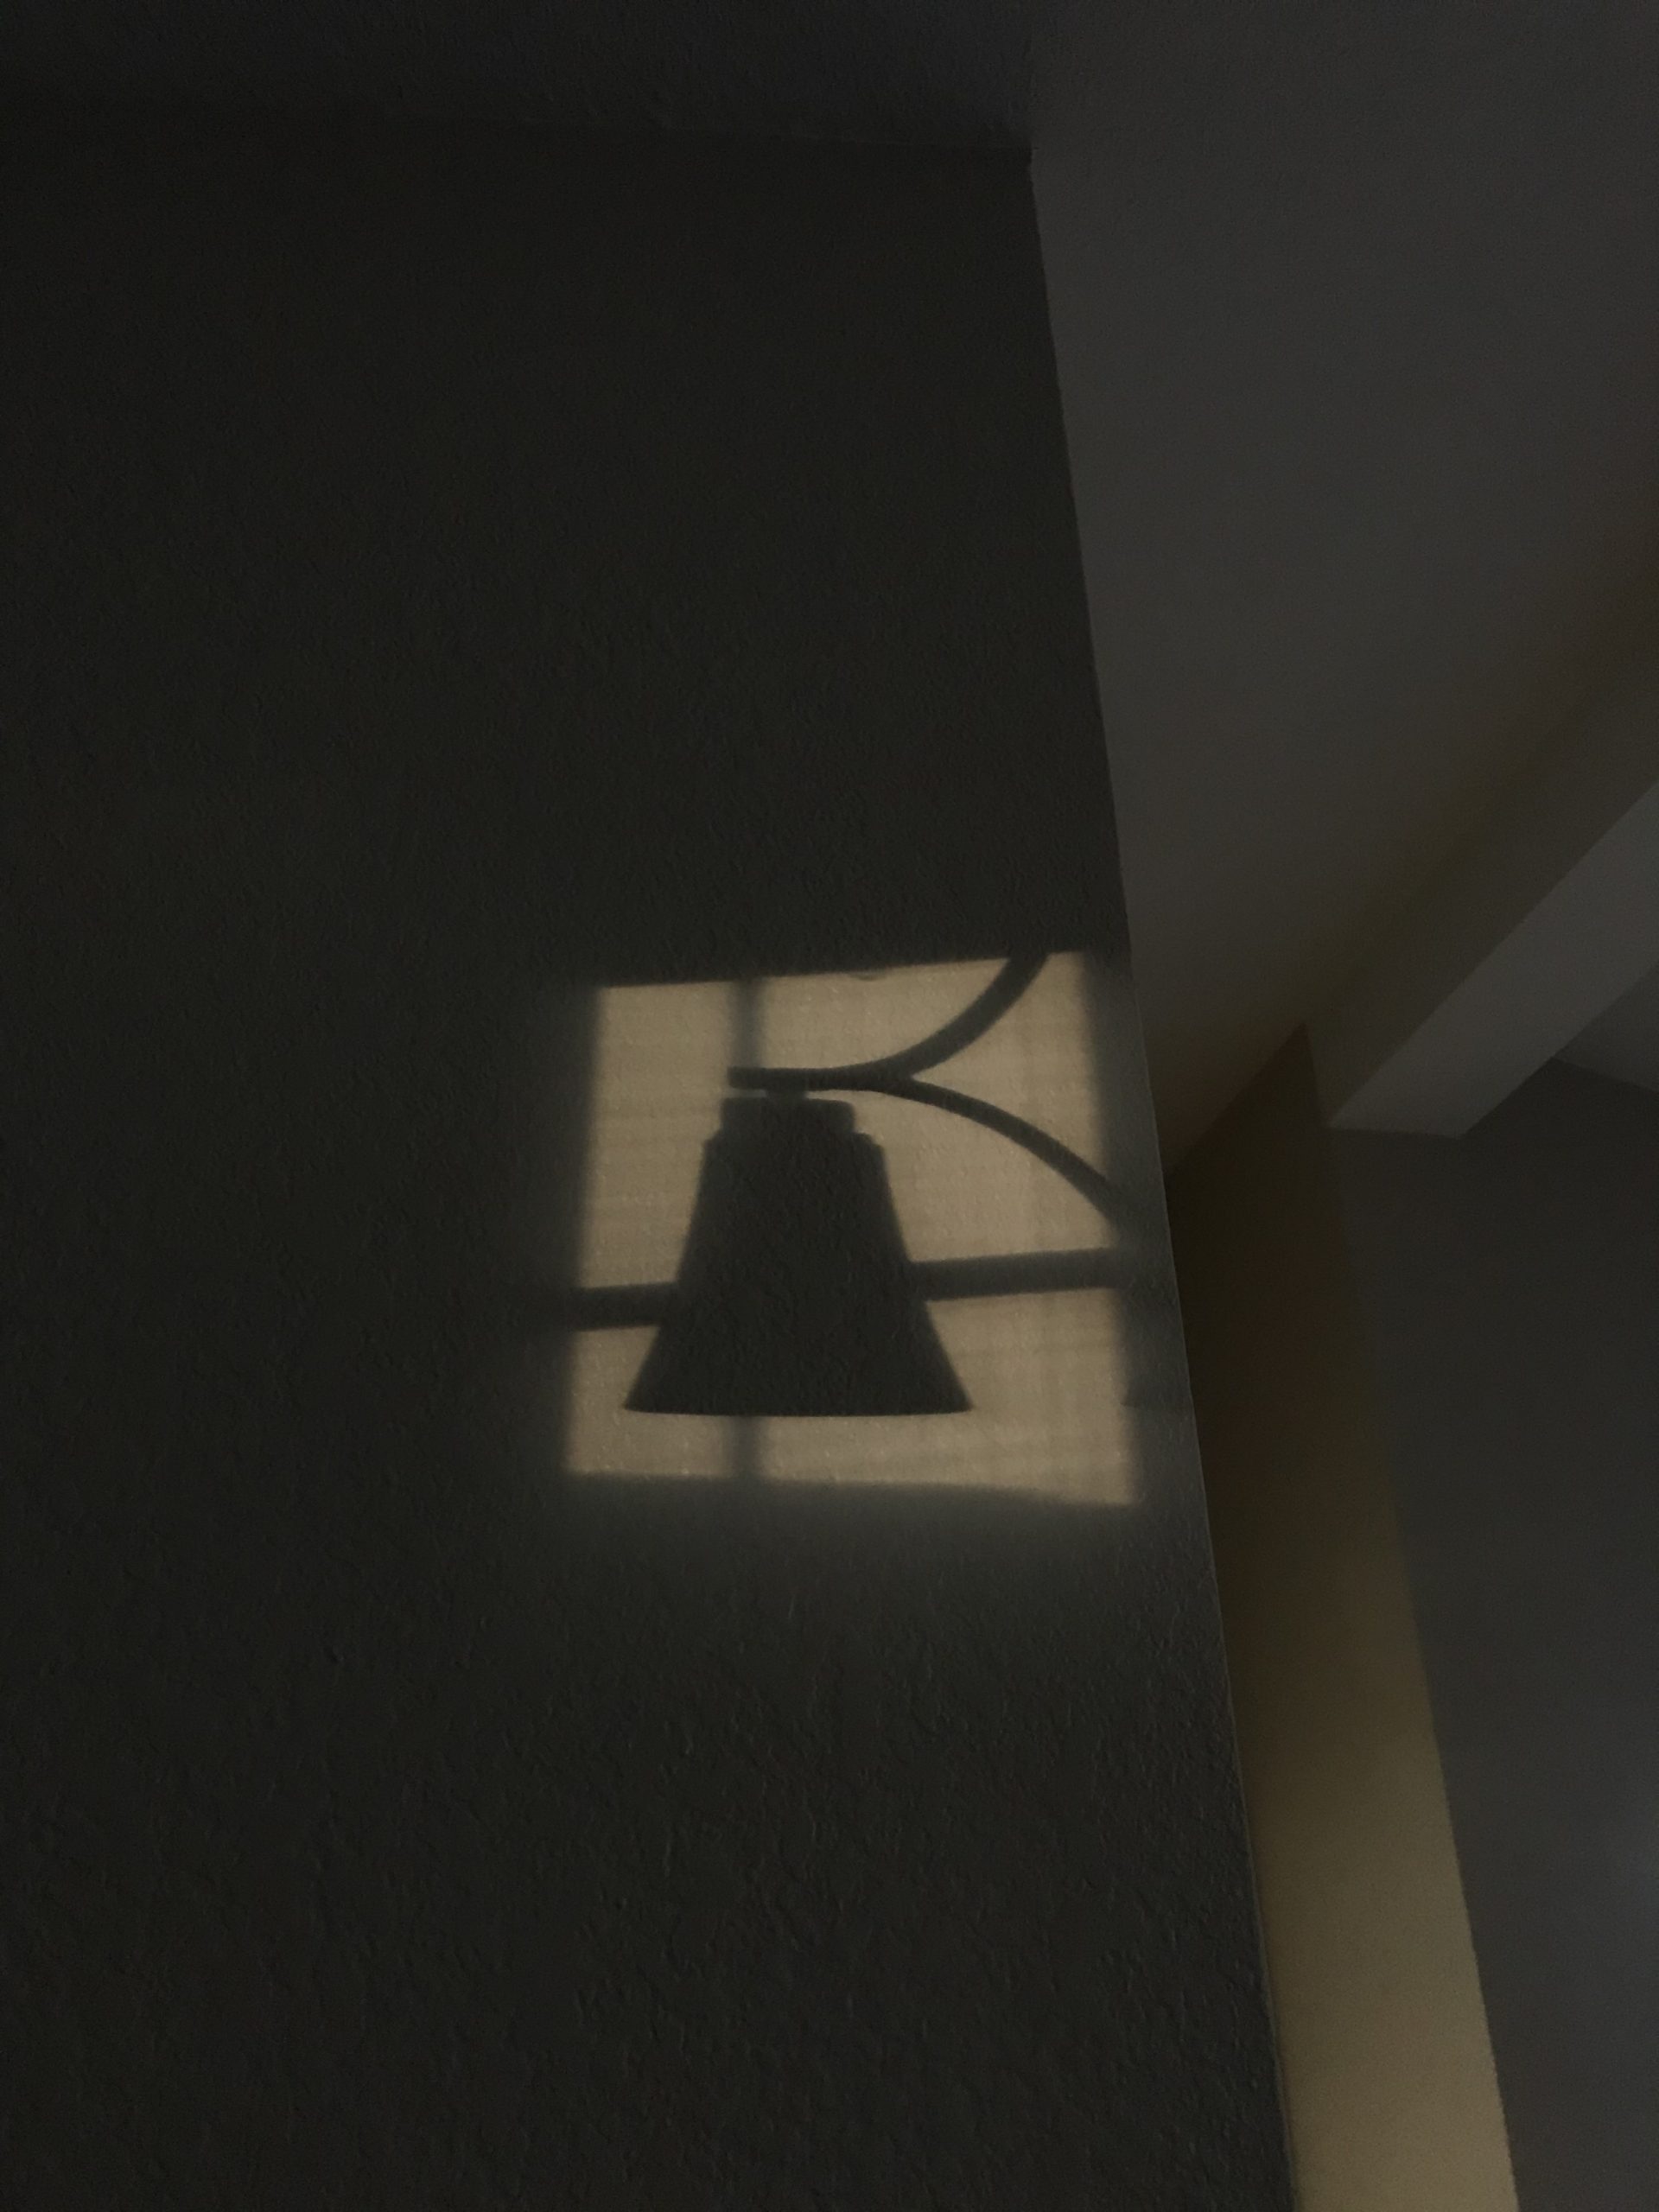 A shadow of a lamp on the wall.